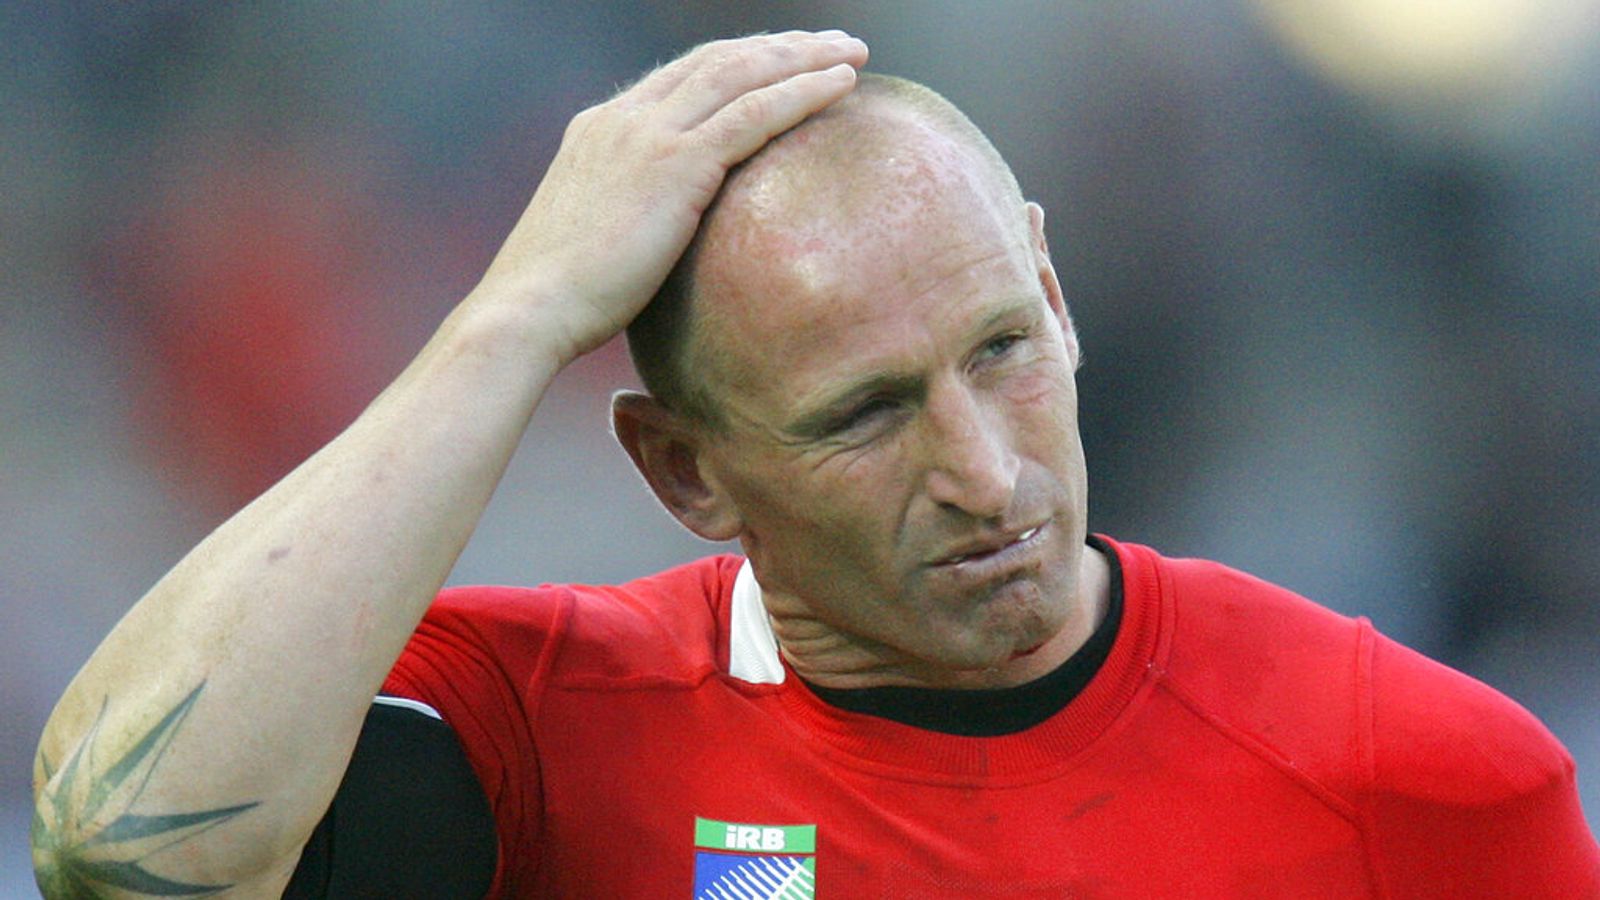 Gareth Thomas settles case with ex-partner who accused former Welsh rugby star of 'deceptively' giving him HIV